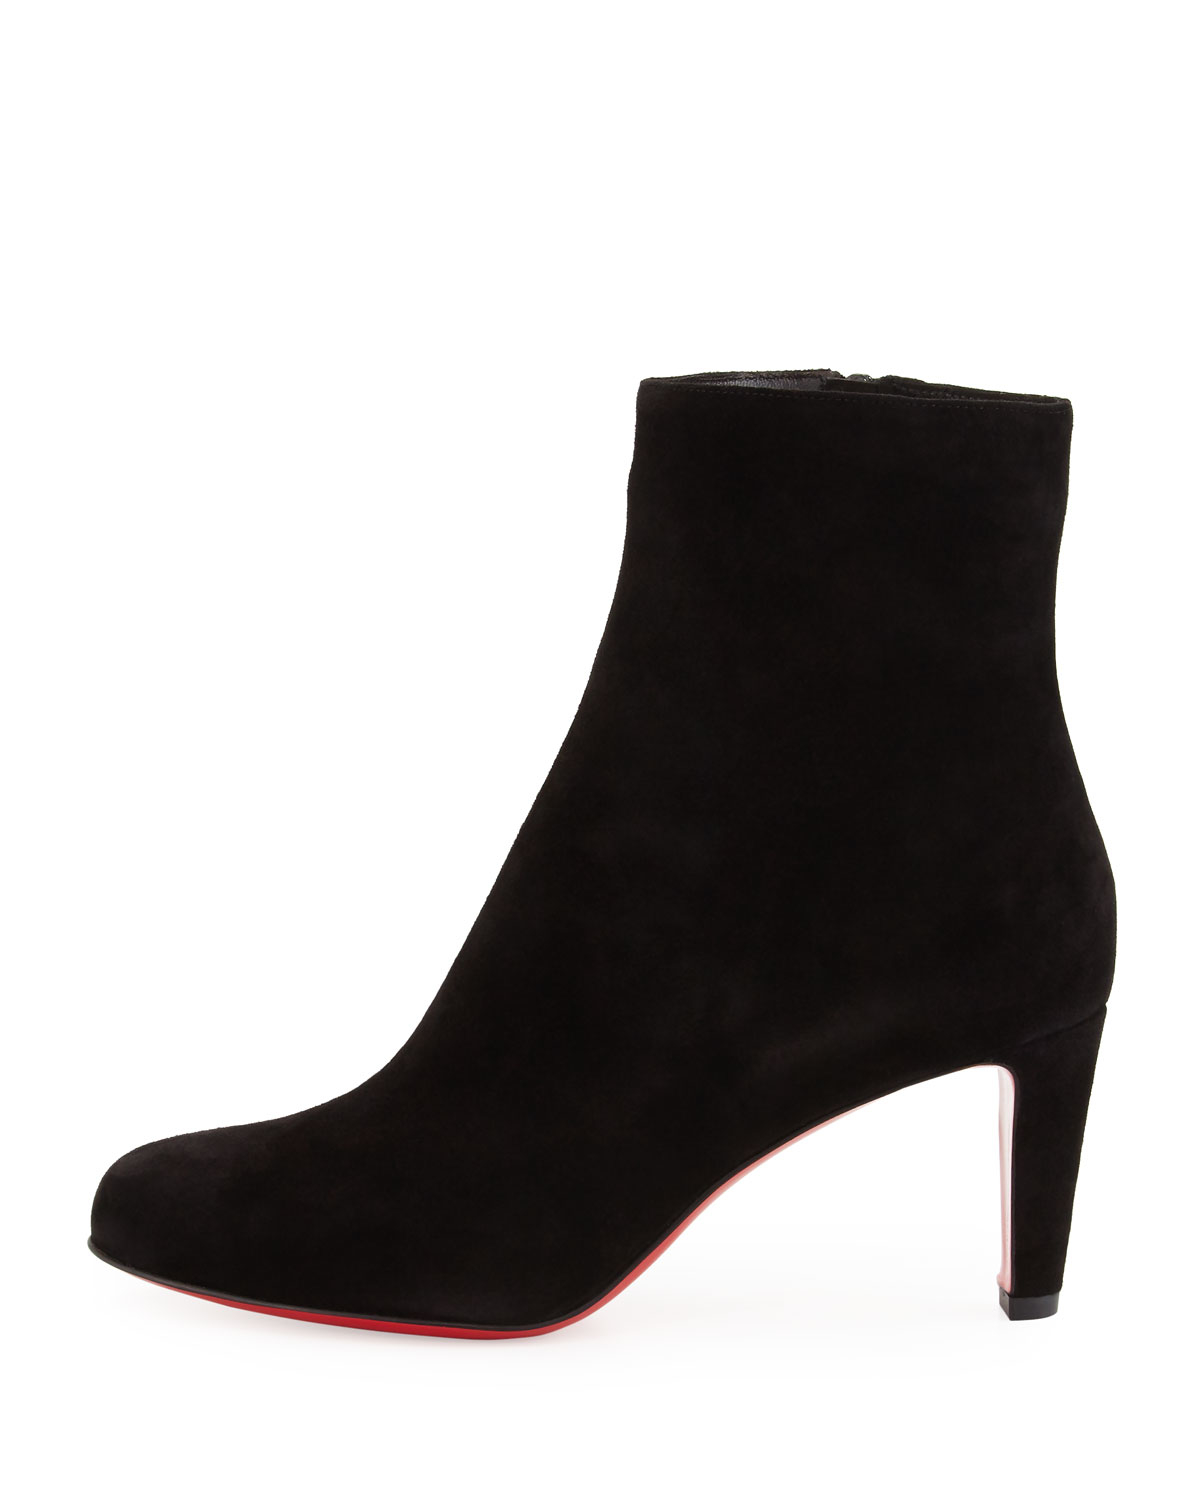 laboutin replica - christian louboutin round-toe ankle boots Brown suede - Bbridges